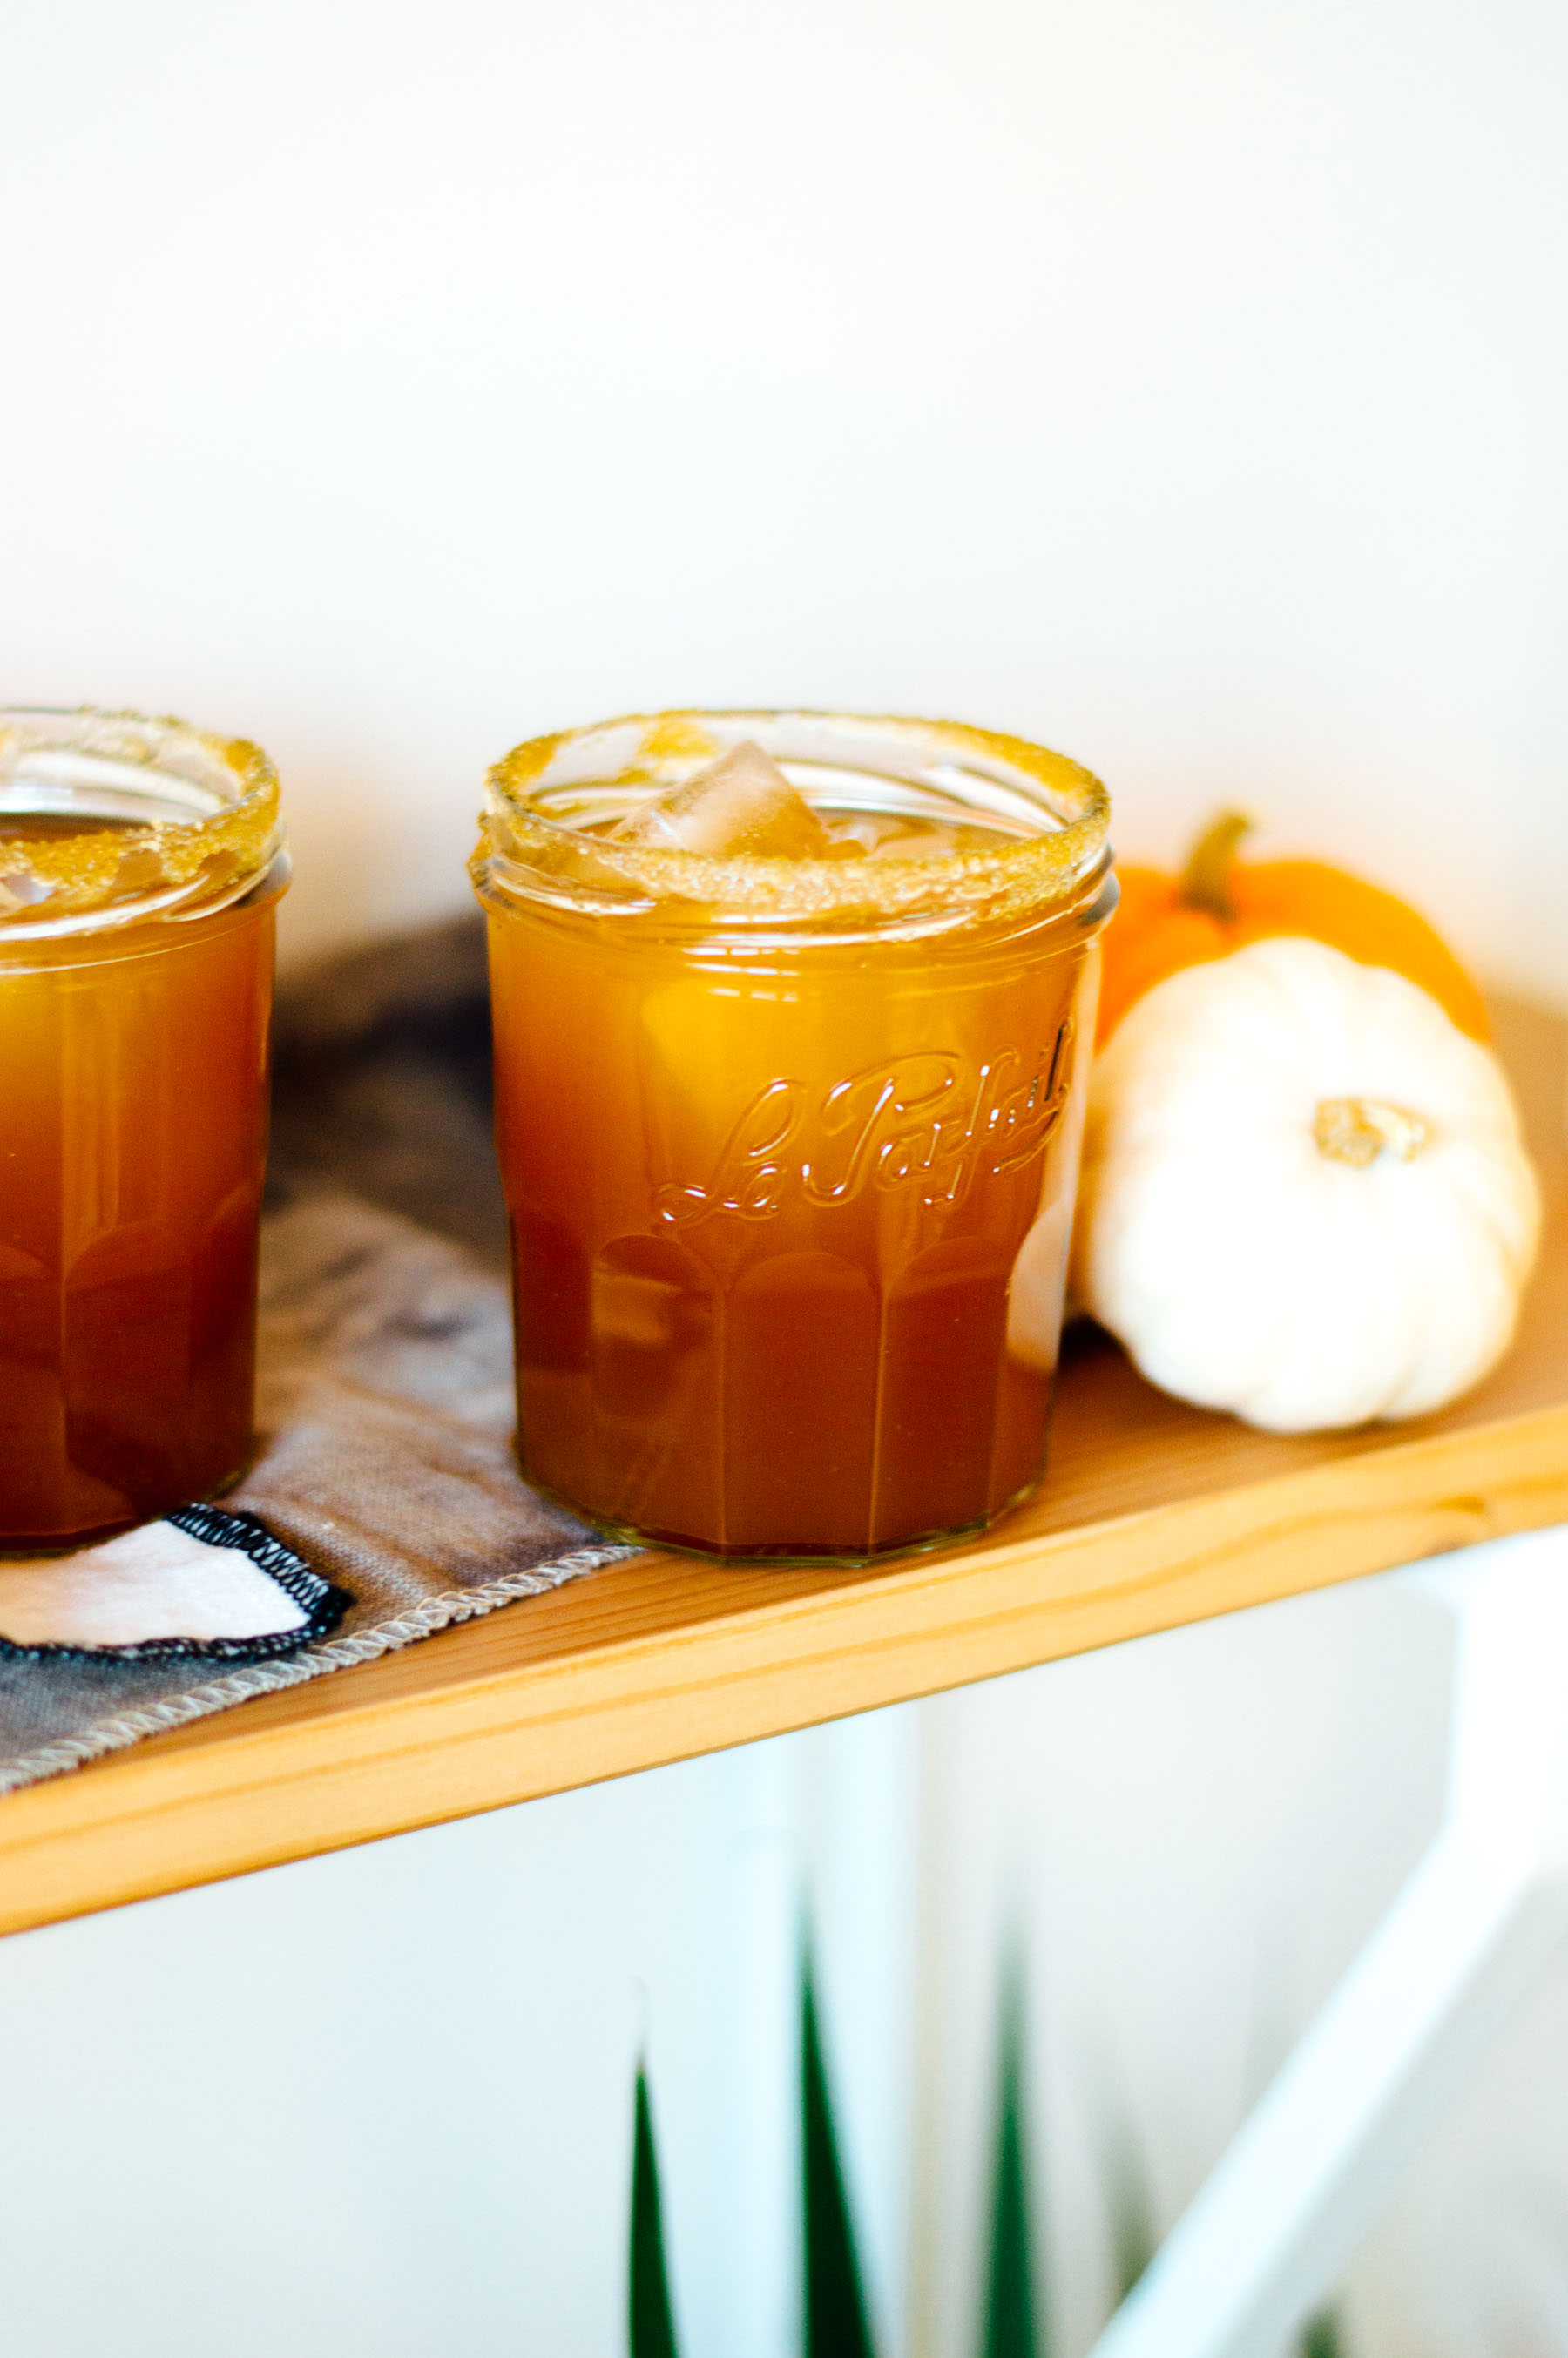 12 Fall cocktails to try right now (before winter gets here!) including this Spiked Pumpkin Spice Apple Cider by Gabriella Valladares | bygabriella.co